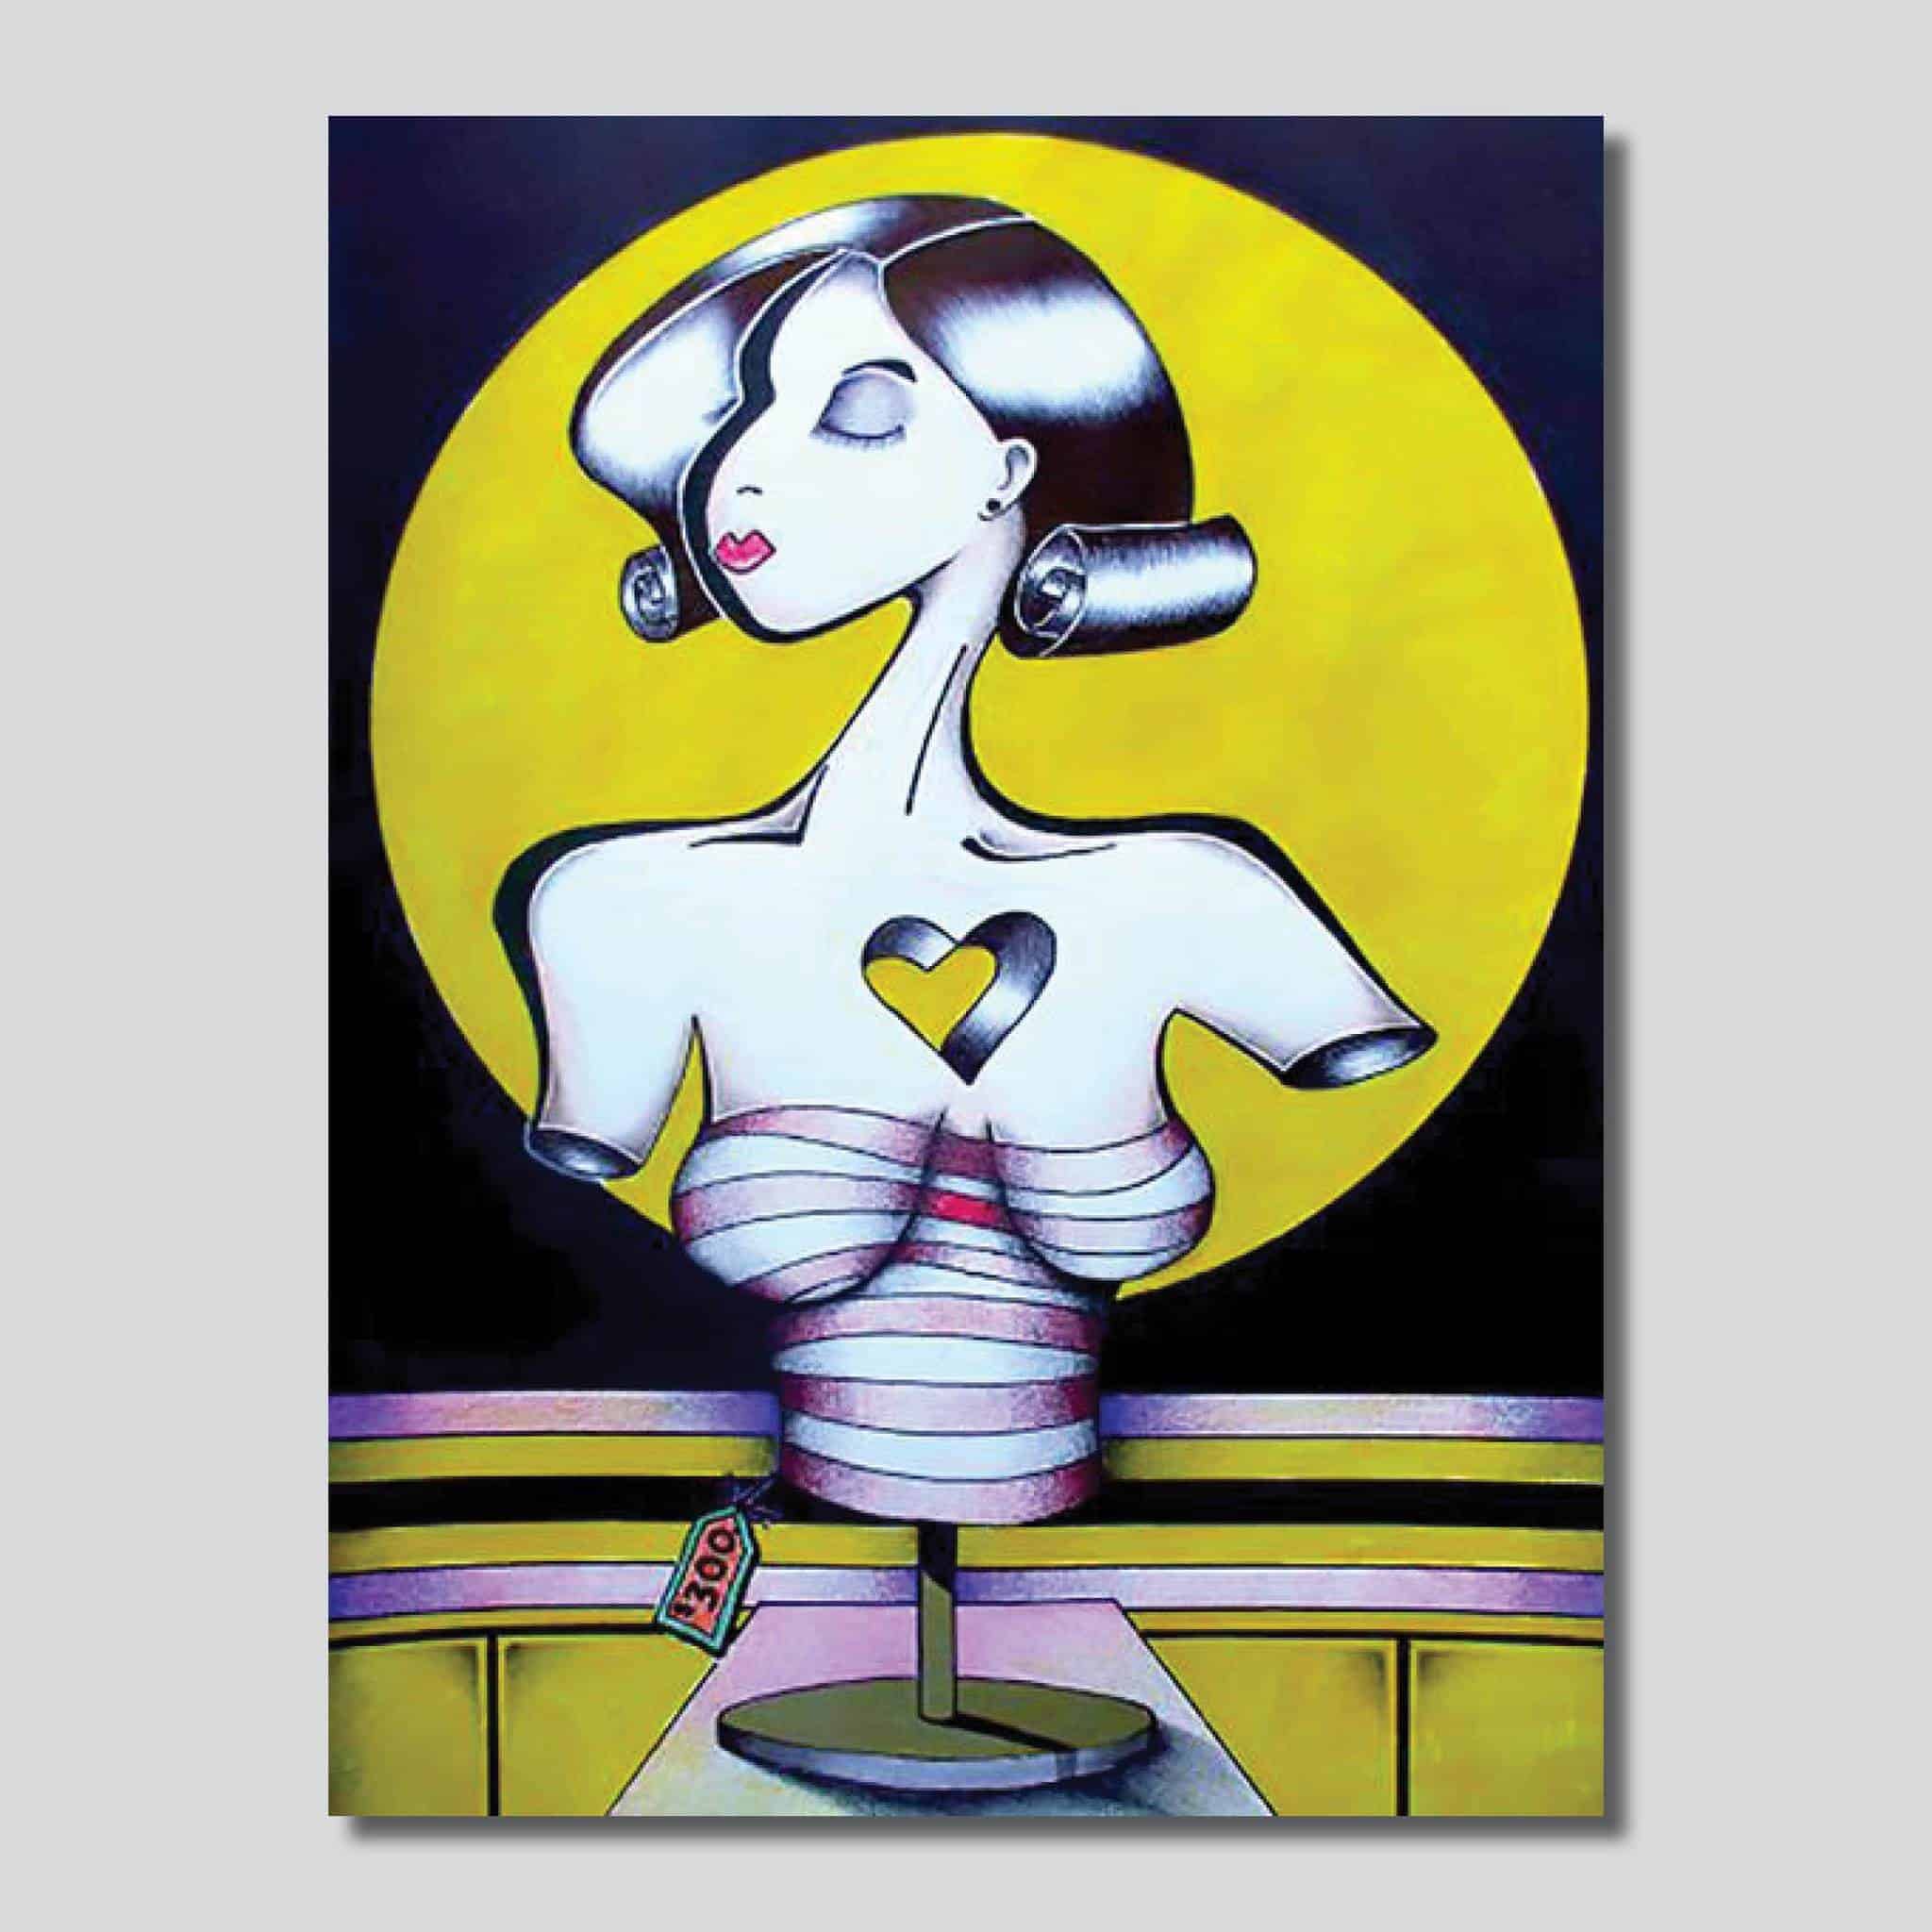 Le Mannequin 8.5″ x 11″ Giclee On High Gloss MetalBy: Ken Caperton